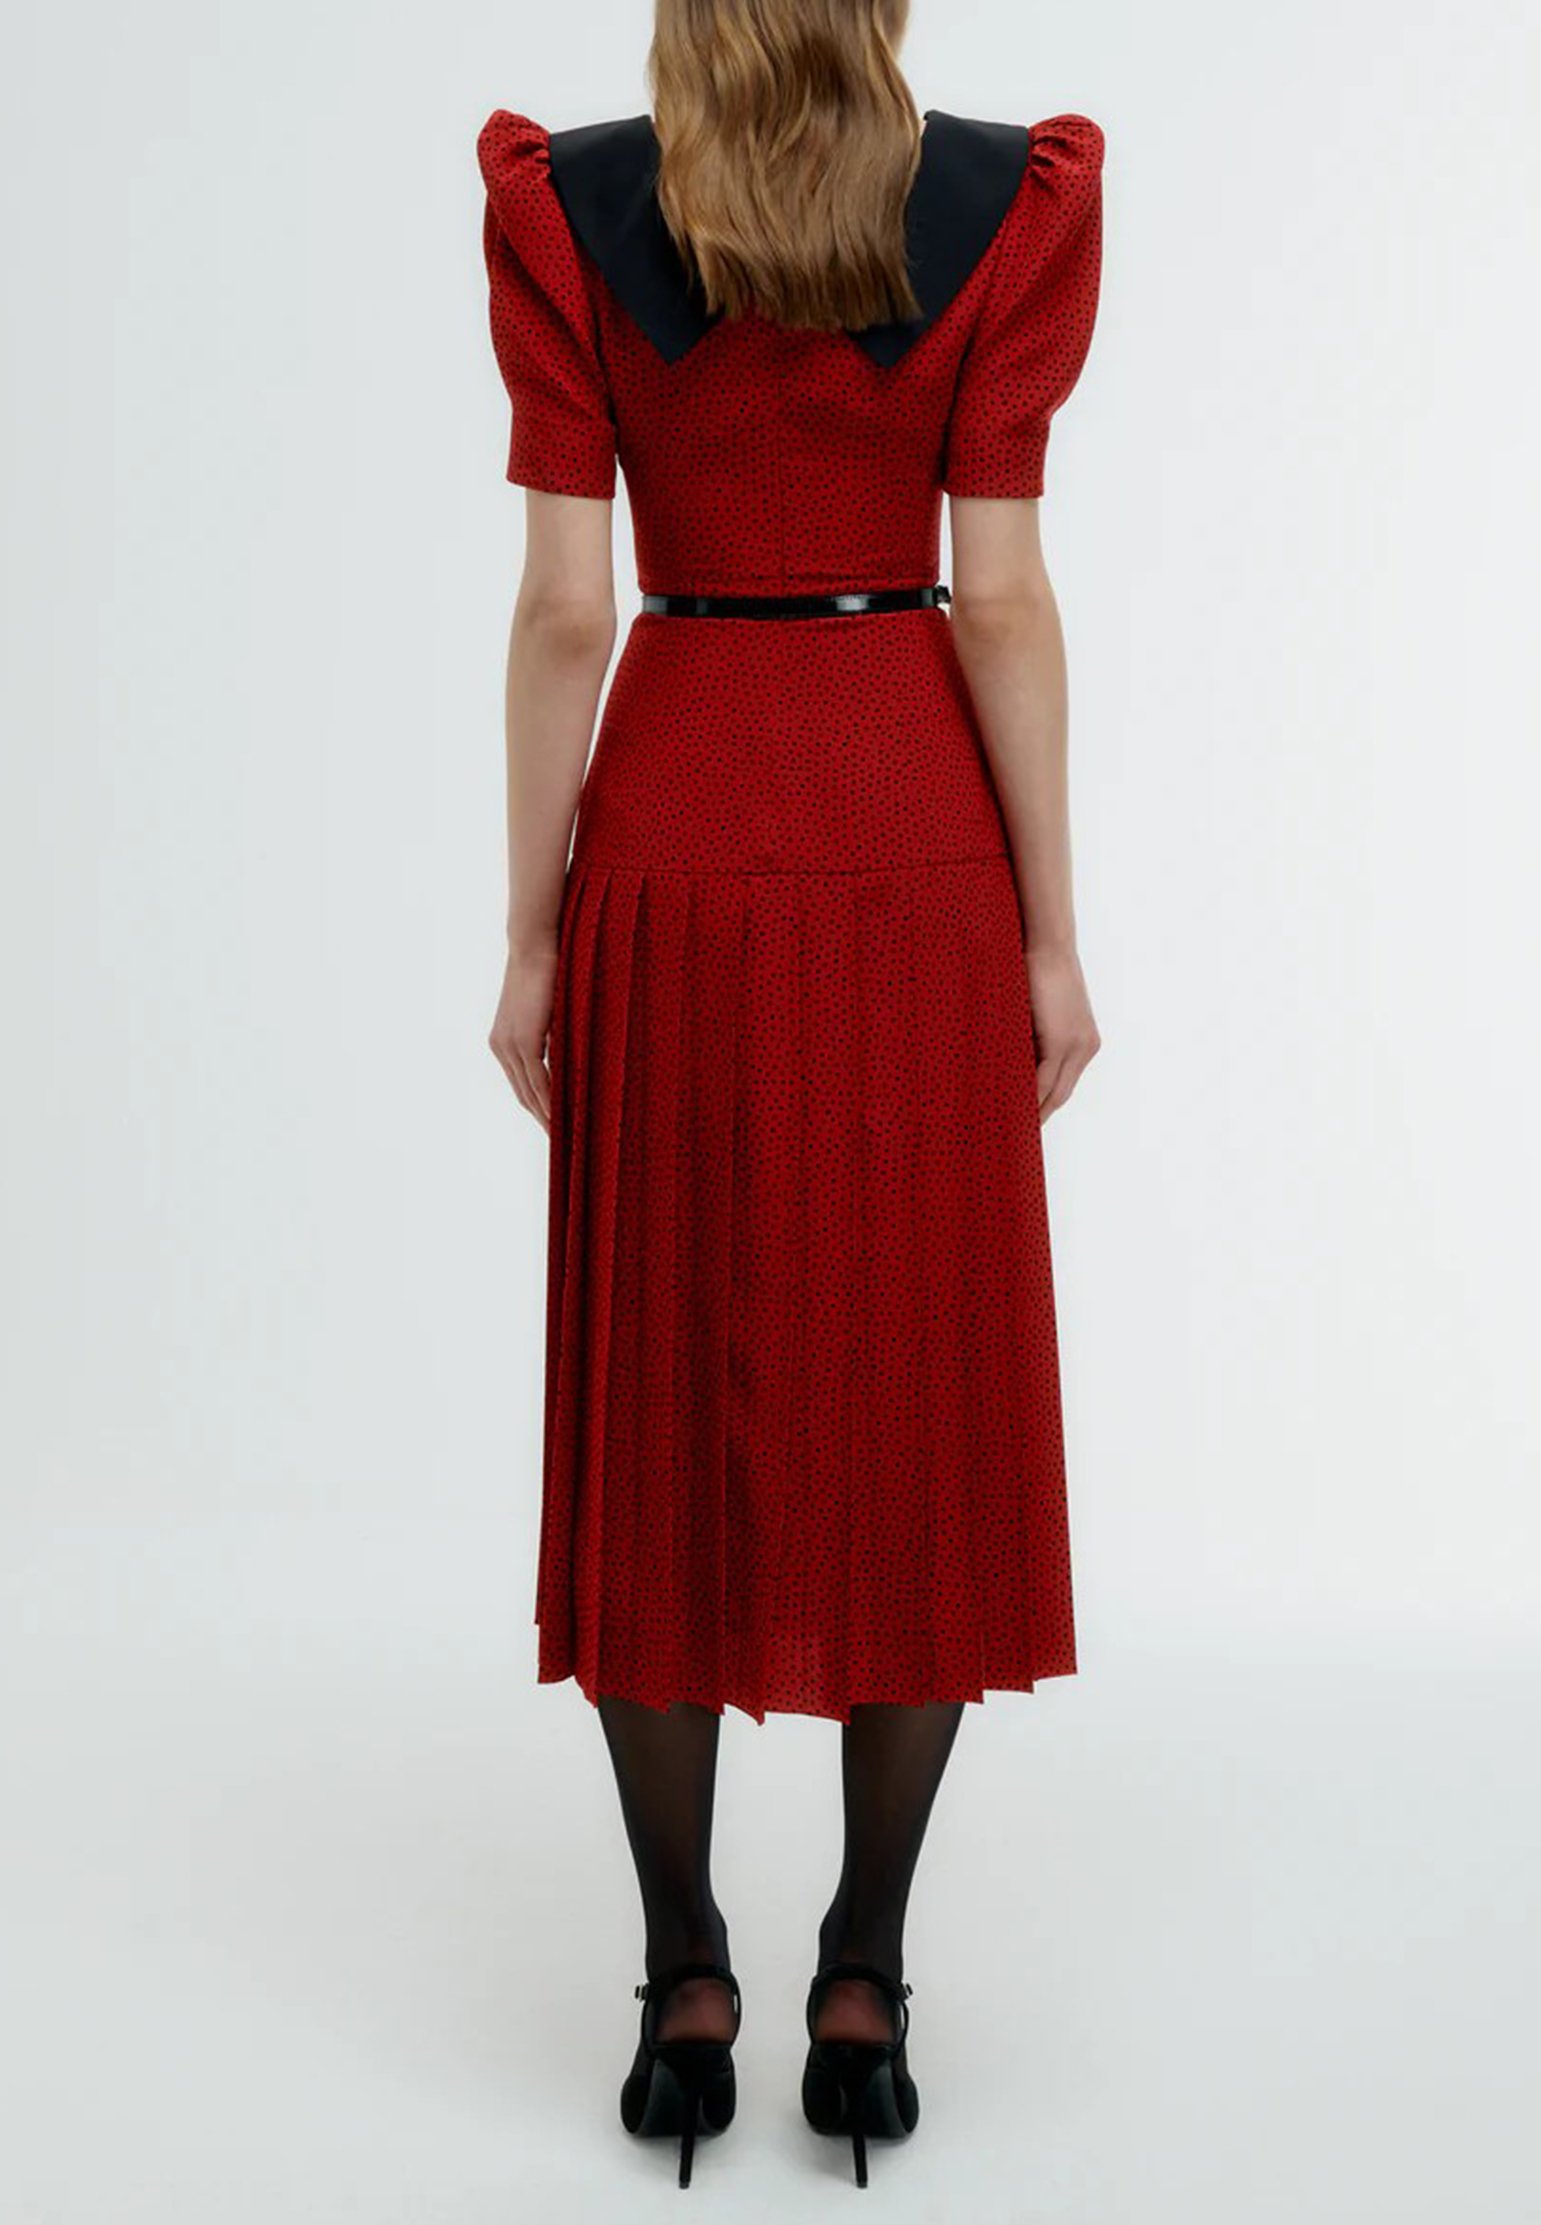 Dress ALLESANDRA RICH Color: red (Code: 817) in online store Allure